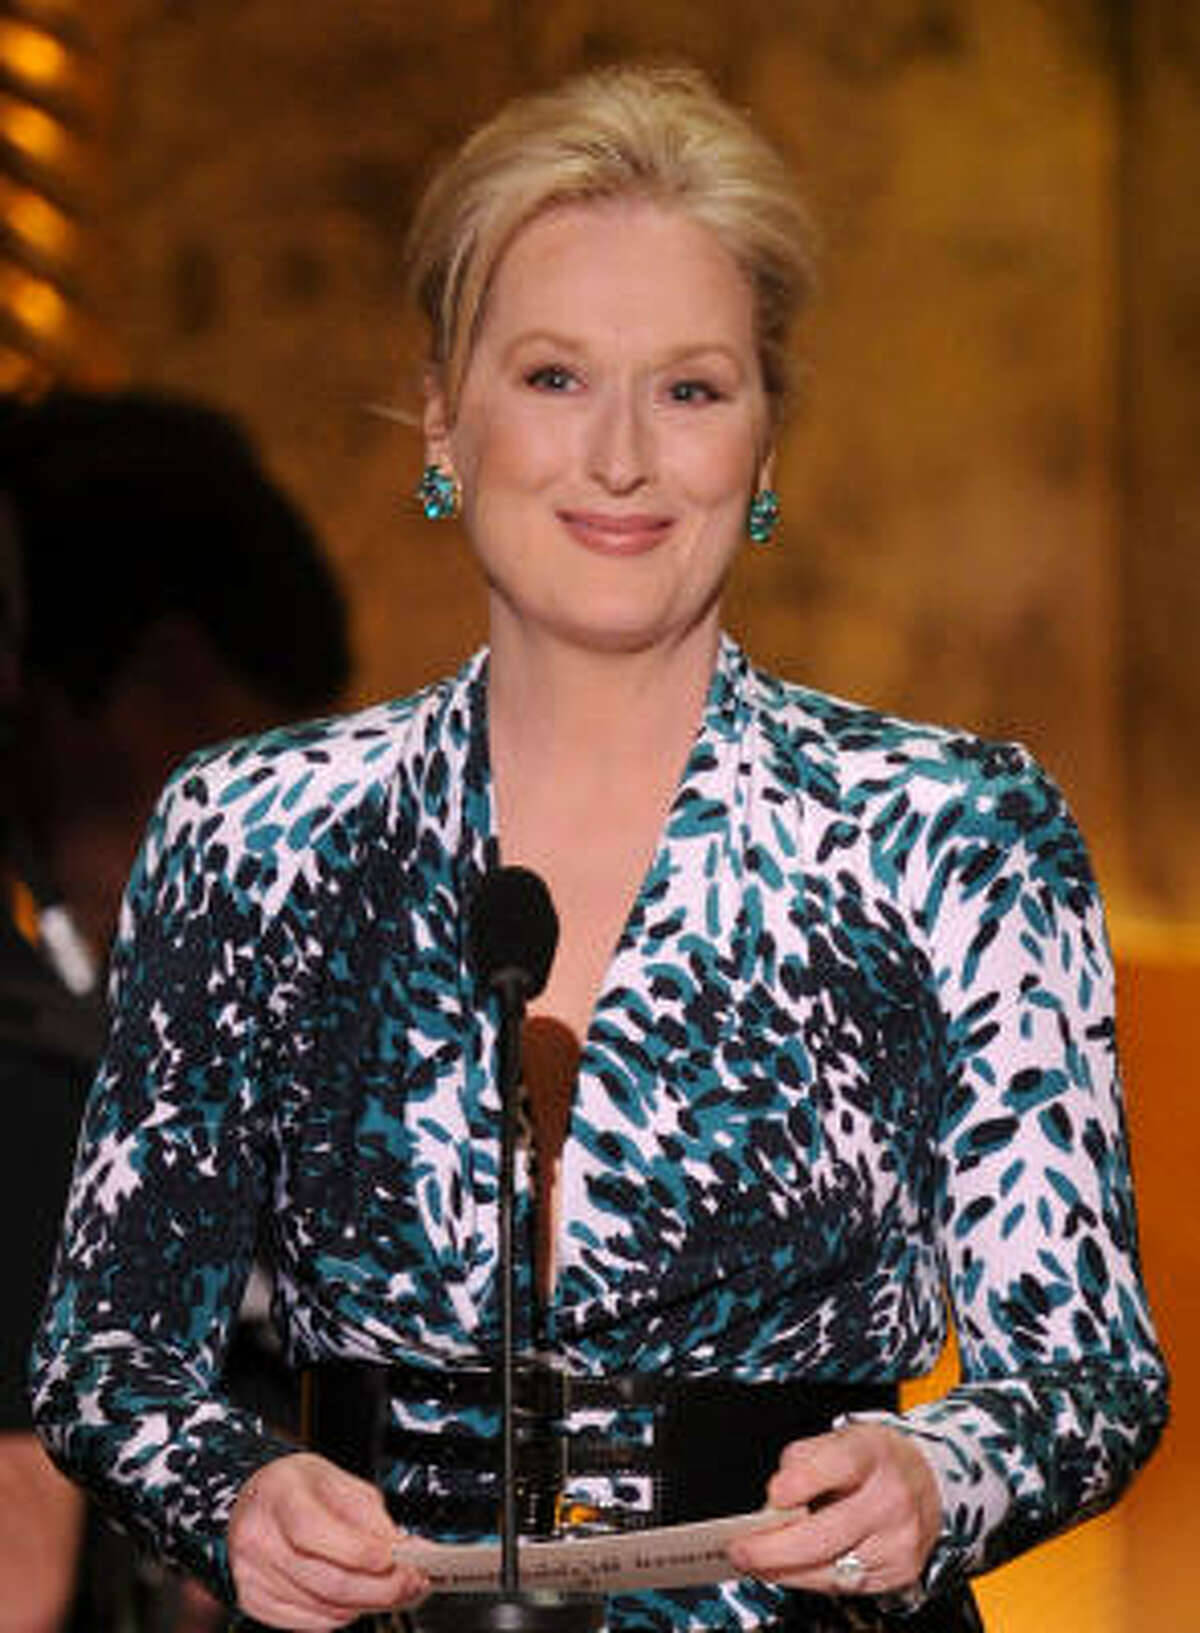 Meryl Streep's print dress may be divisive among the fashion police, but we think it suits her free-spirit personality.